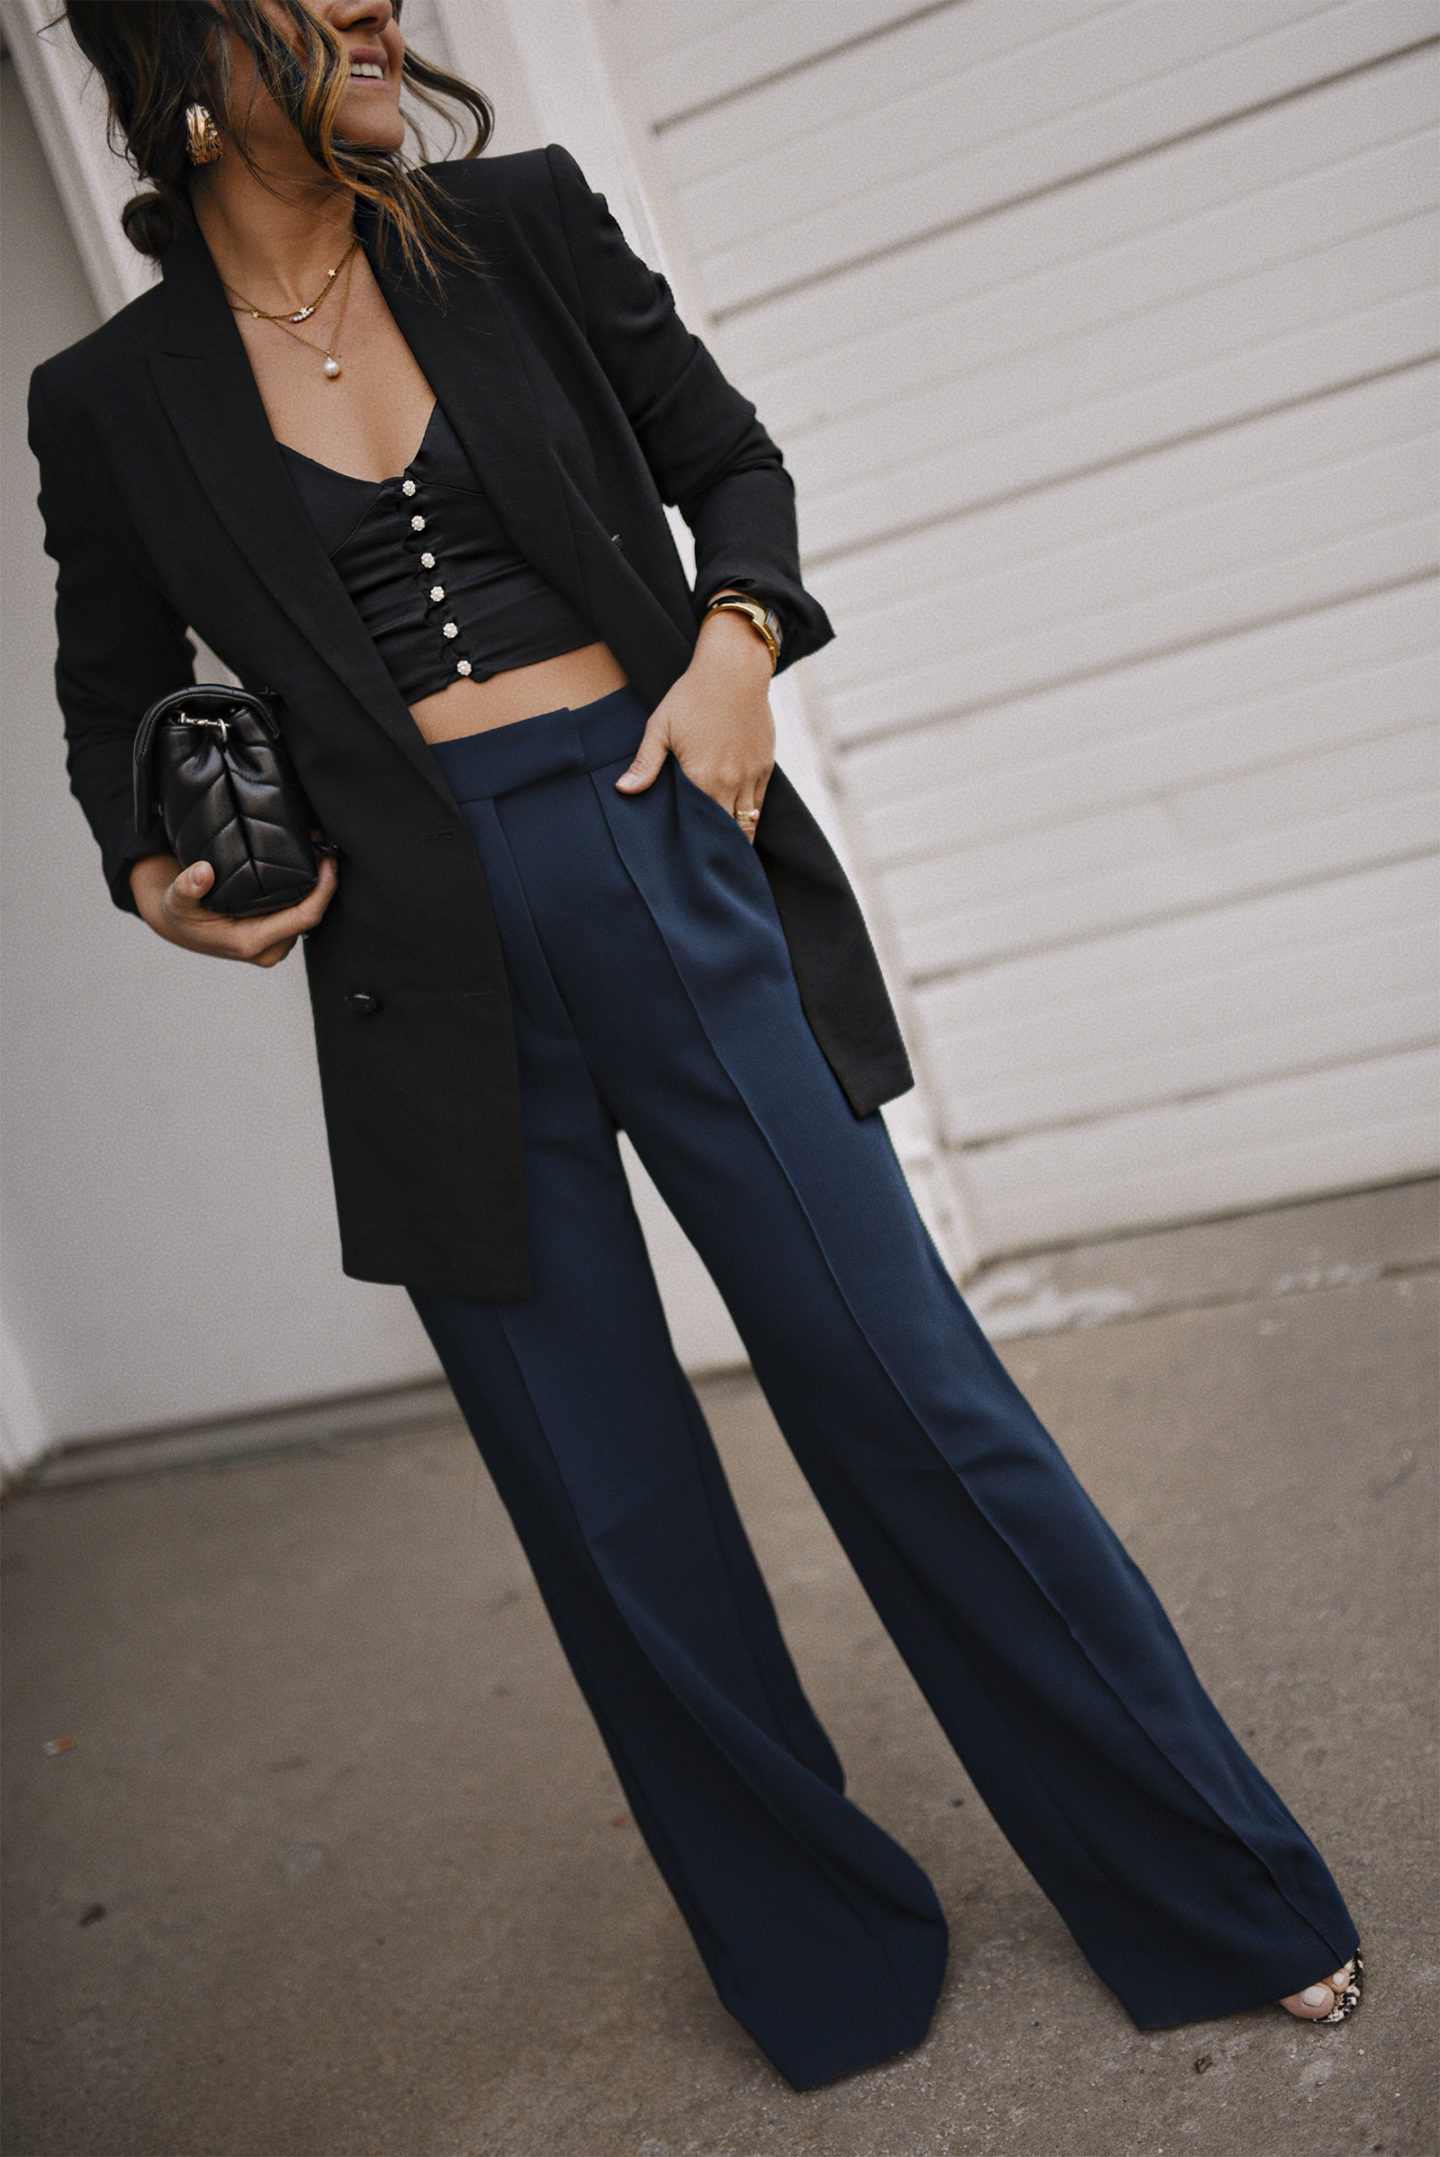 styling black and navy blue together 5 - CHIC TALK | CHIC TALK